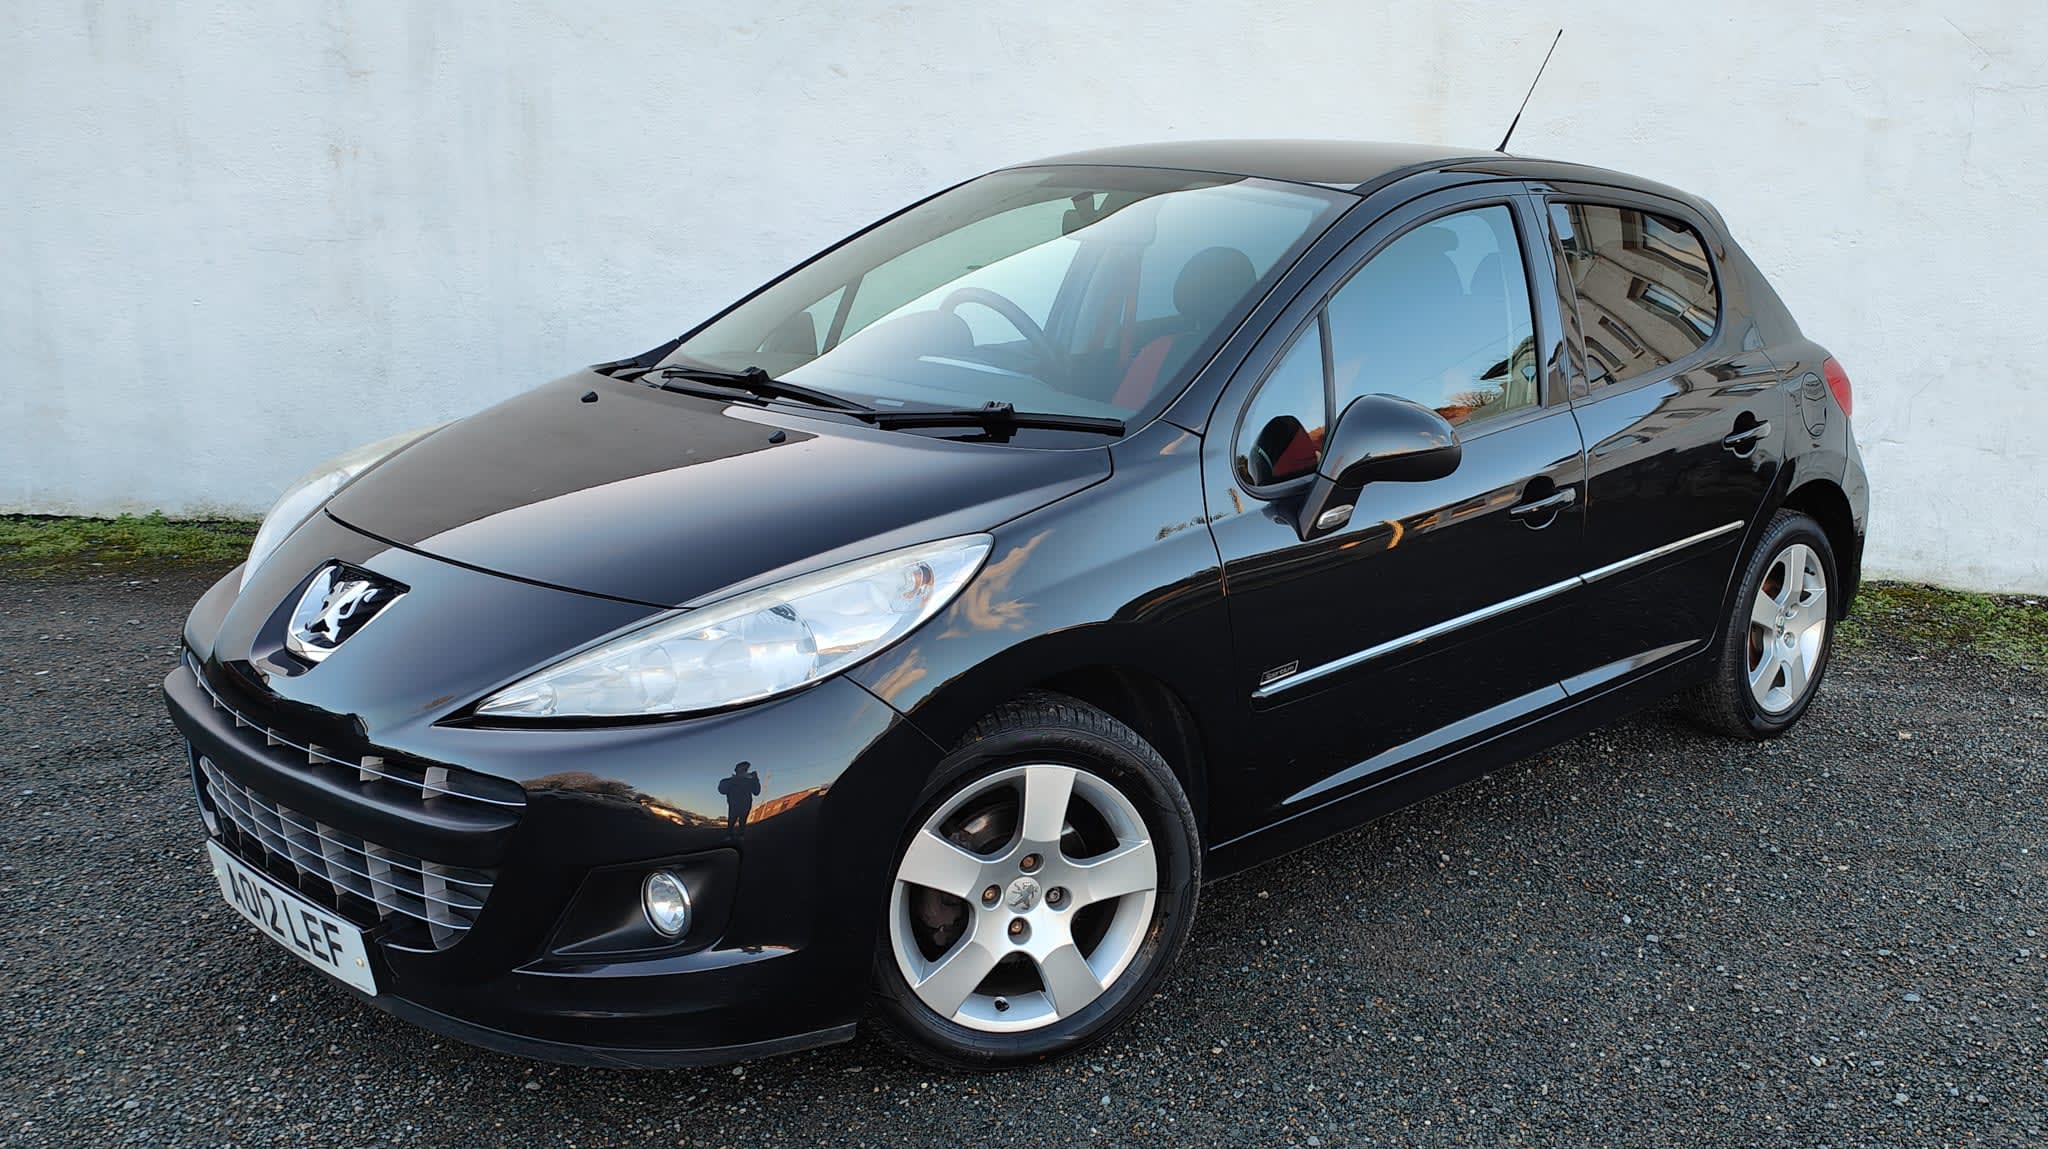 Peugeot 207 1.6HDI Sport - Vehicles - Gibson's Car Sales